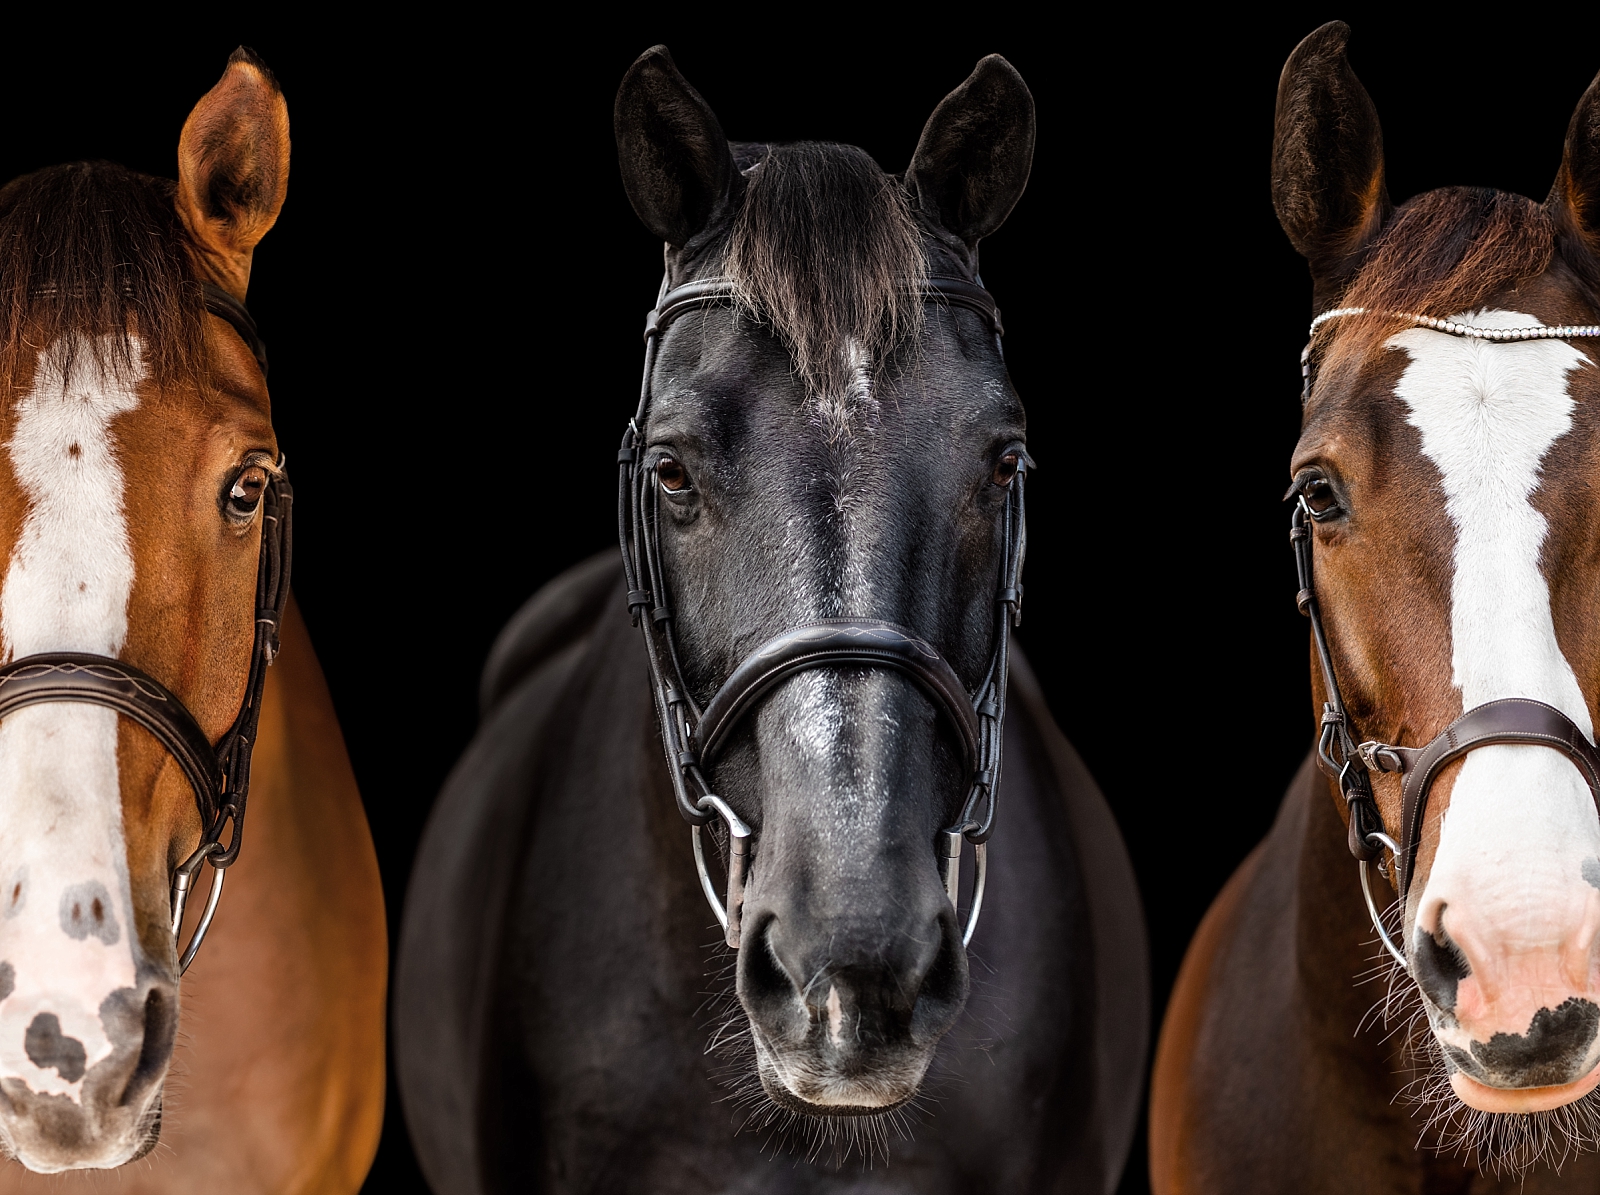 Fine art equine photographer near Tallahassee FL. Black background equine photo with multiple horses.